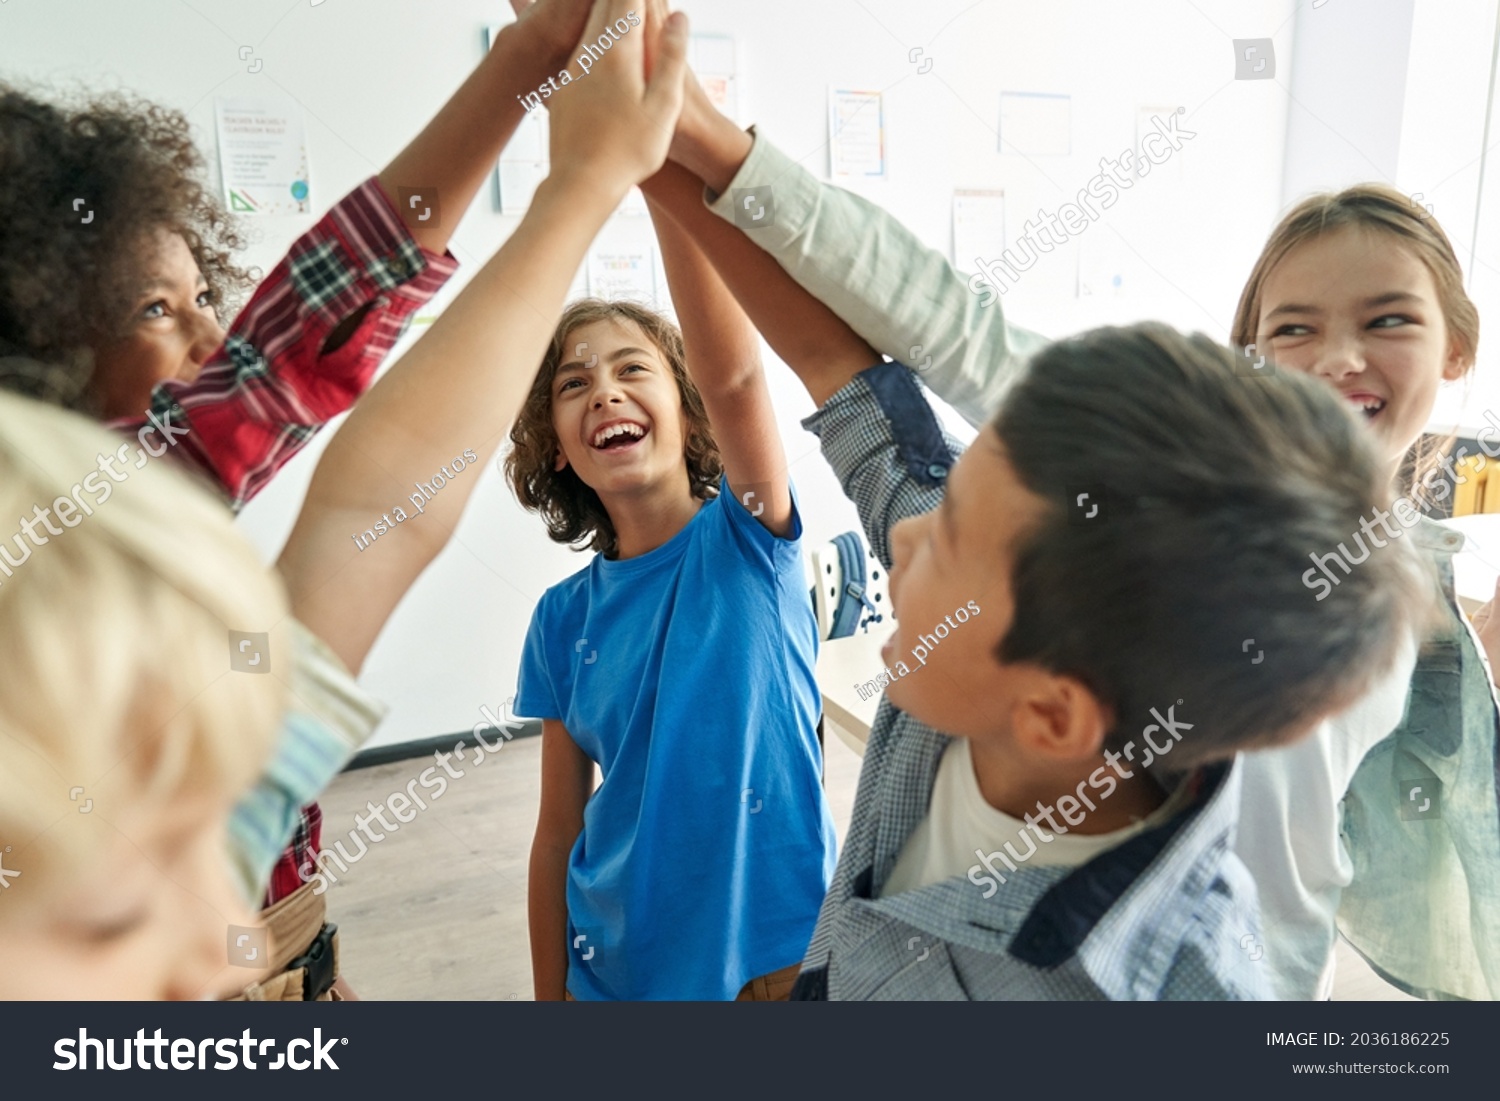 Happy diverse multiethnic kids junior school students group giving high five together in classroom. Excited children celebrating achievements, teamwork, diversity and friendship with highfive concept. #2036186225